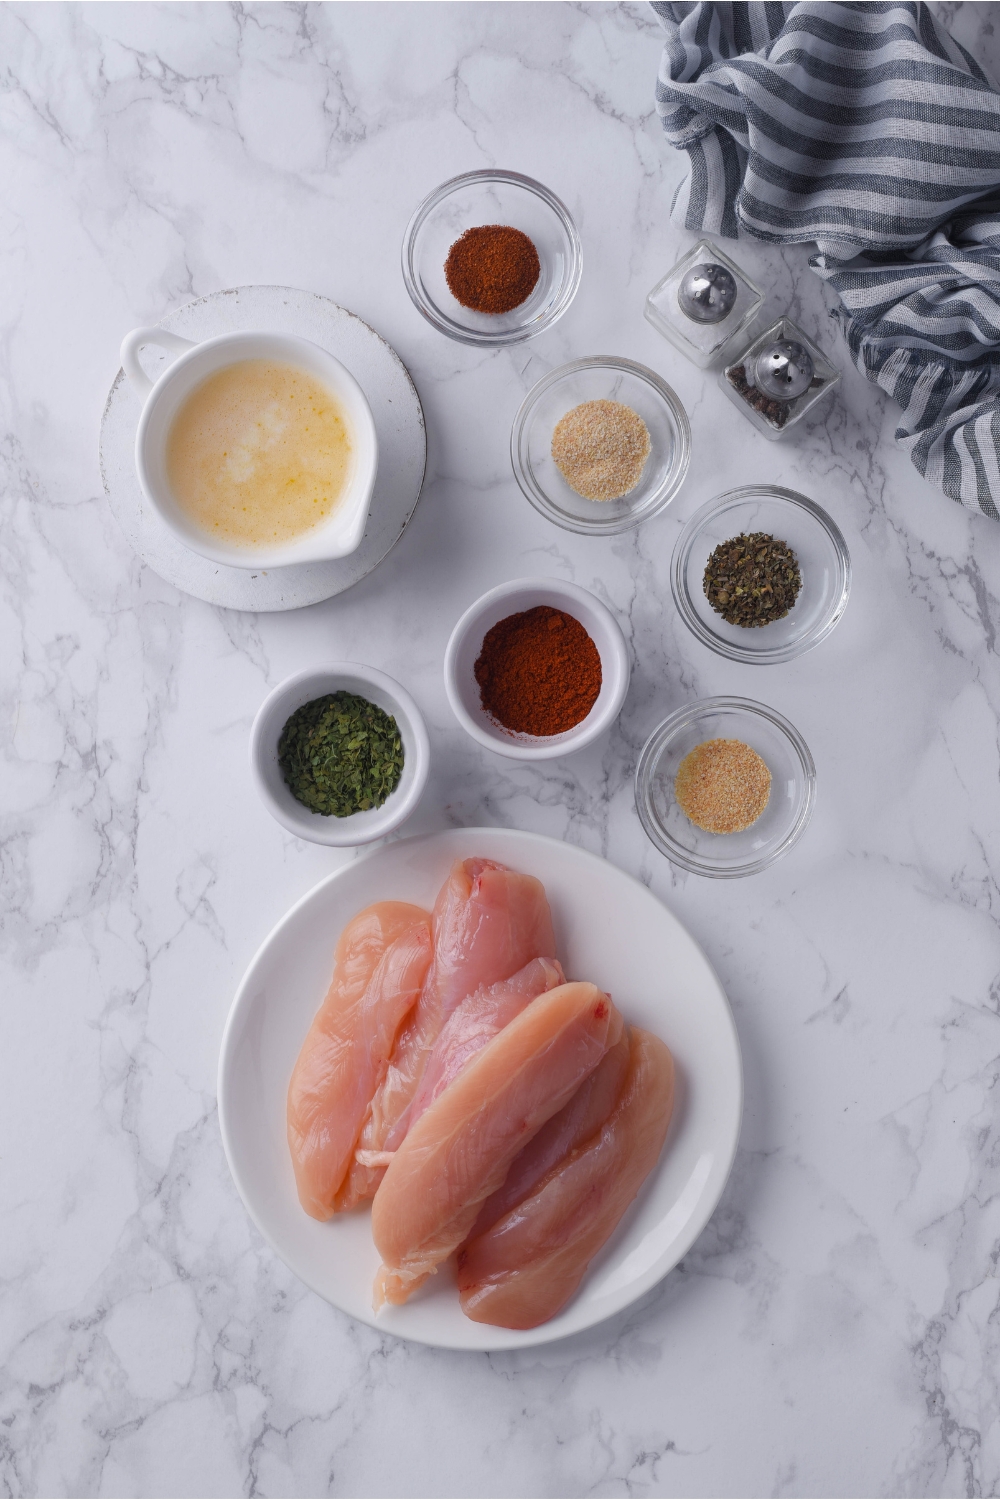 An assortment of ingredients for baked chicken tenders including raw chicken tenderloins, spices, and melted butter.